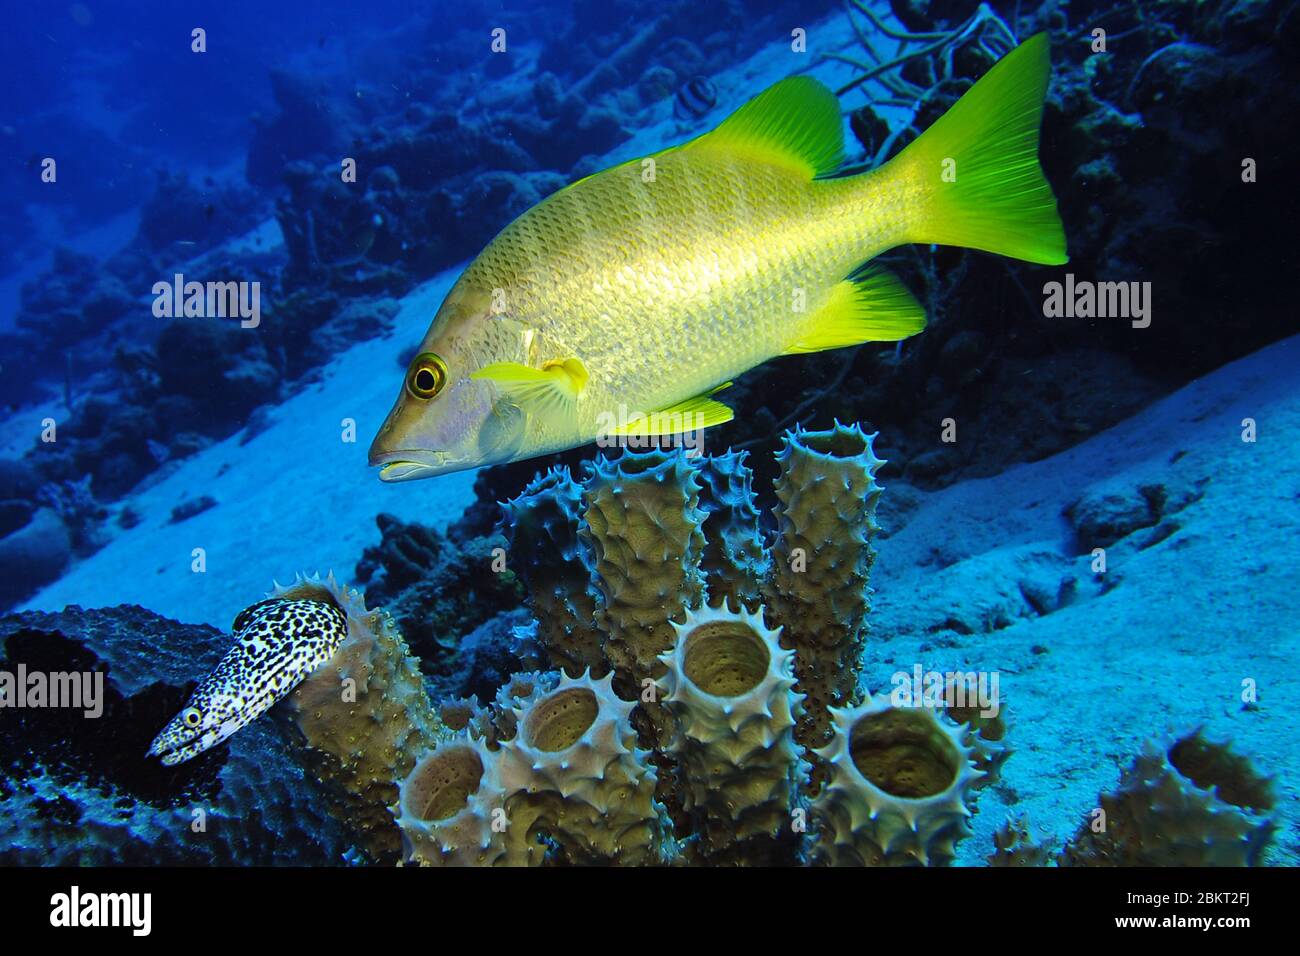 Yellow snapper over tube sponges and a black spotted moray eel coming out of a tube sponge in the caribbean sea, Bonaire, island, Caribbean Stock Photo